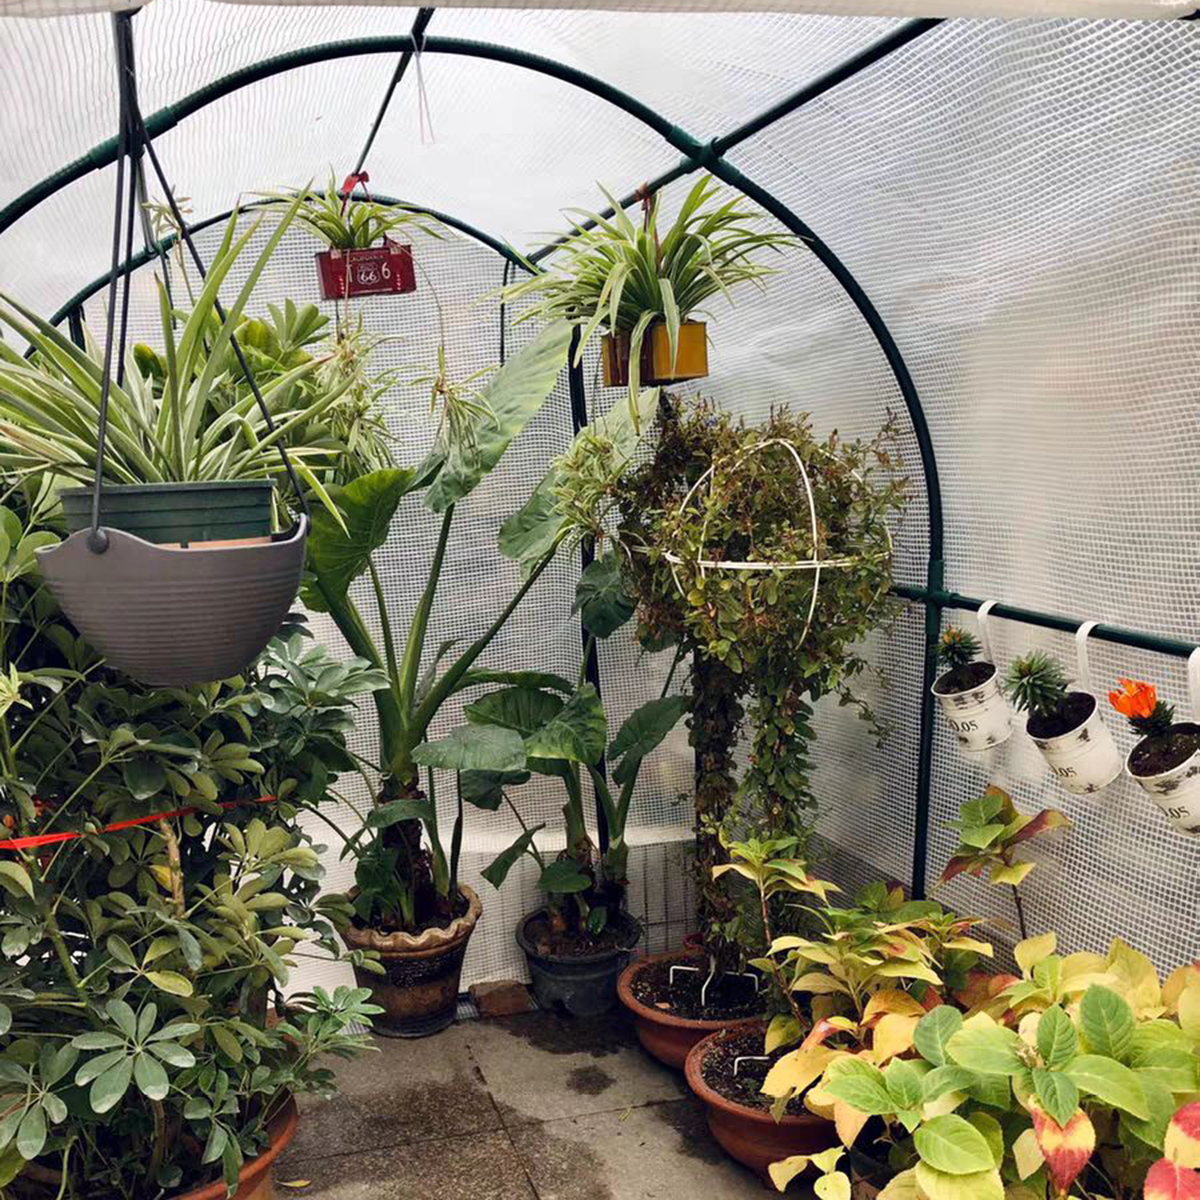 3X2X2M-Greenhouse-Planter-House-Canopy-Outdoor-Plant-Garden-Grow-Growing-House-1938344-6